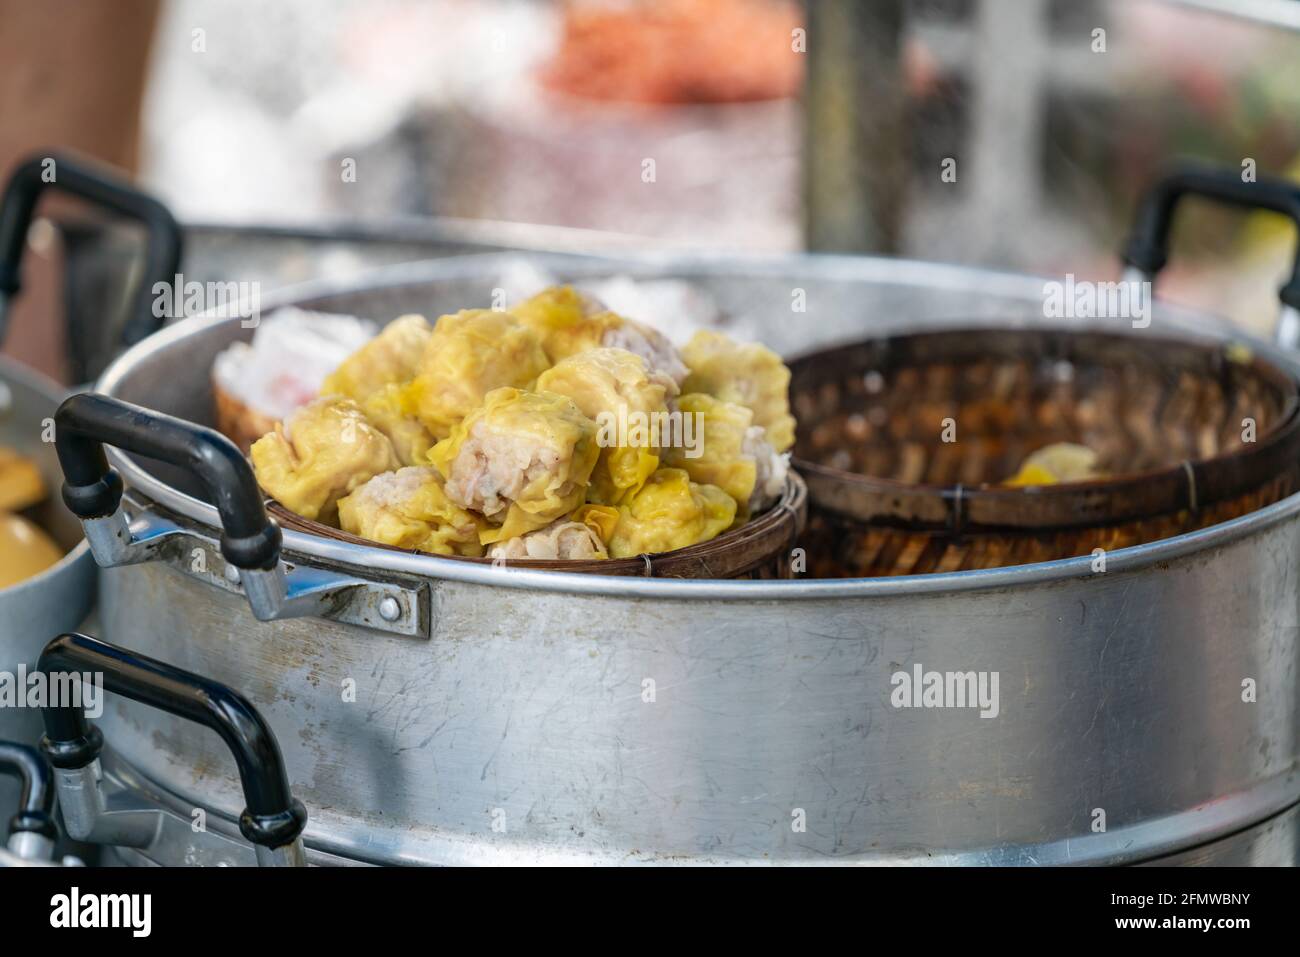 https://c8.alamy.com/comp/2FMWBNY/dim-sum-or-chinese-dumpling-in-a-stream-hot-pot-of-food-wheelbarrow-on-street-food-of-bangkok-many-dumpling-in-a-wooden-basket-is-streaming-in-old-as-2FMWBNY.jpg